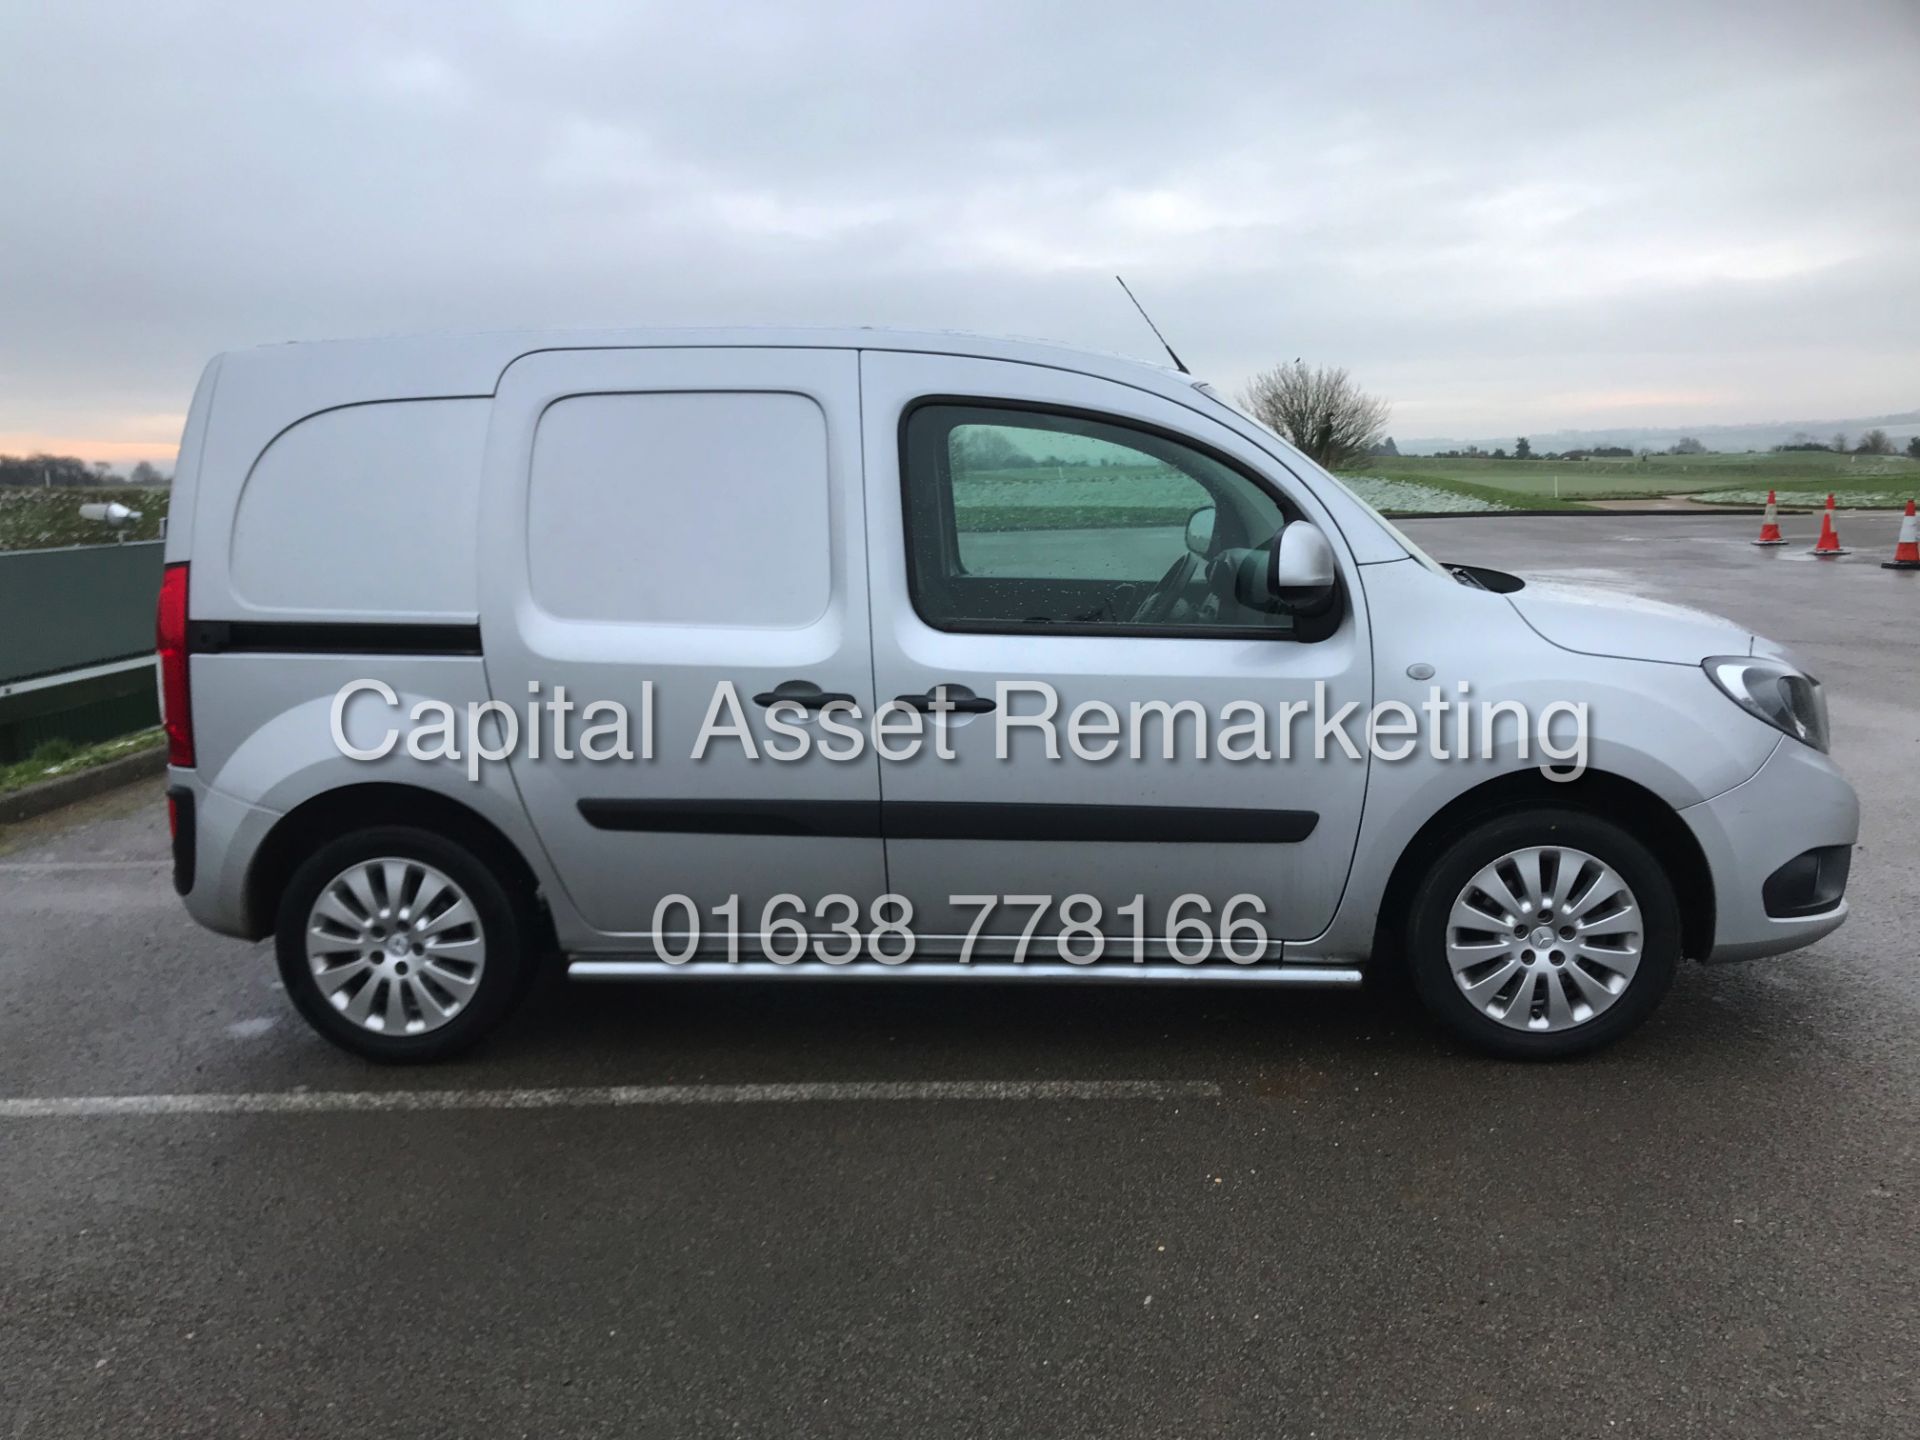 MERCEDES CITAN 111CDI "SPORT" LWB (16 REG) 1 OWNER-AIR CON-6 SPEED-FULLY LOADED *VERY HARD TO FIND* - Image 10 of 18